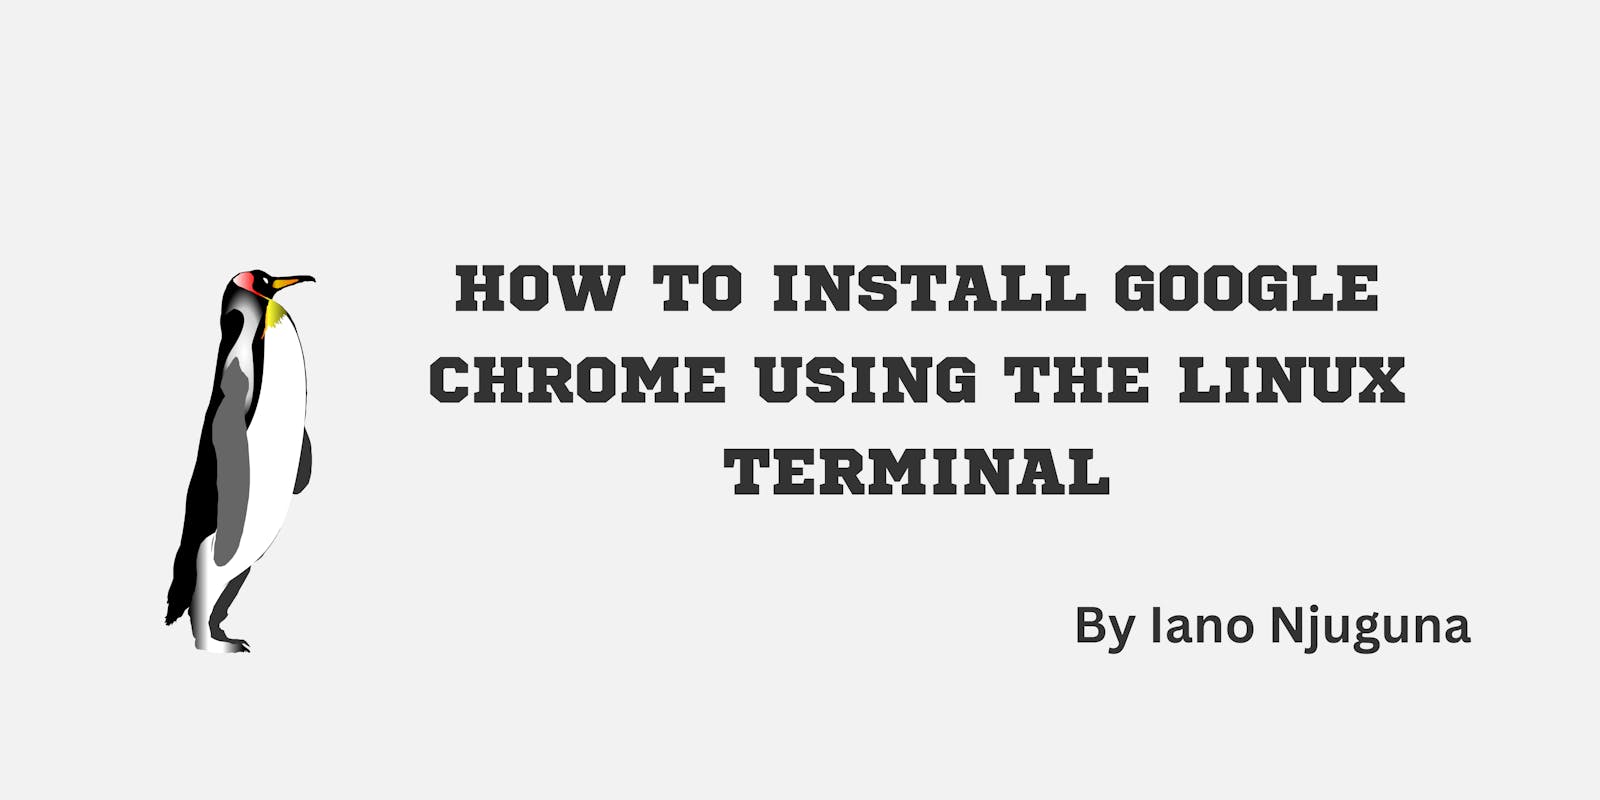 How to Install Google Chrome using the Linux Terminal